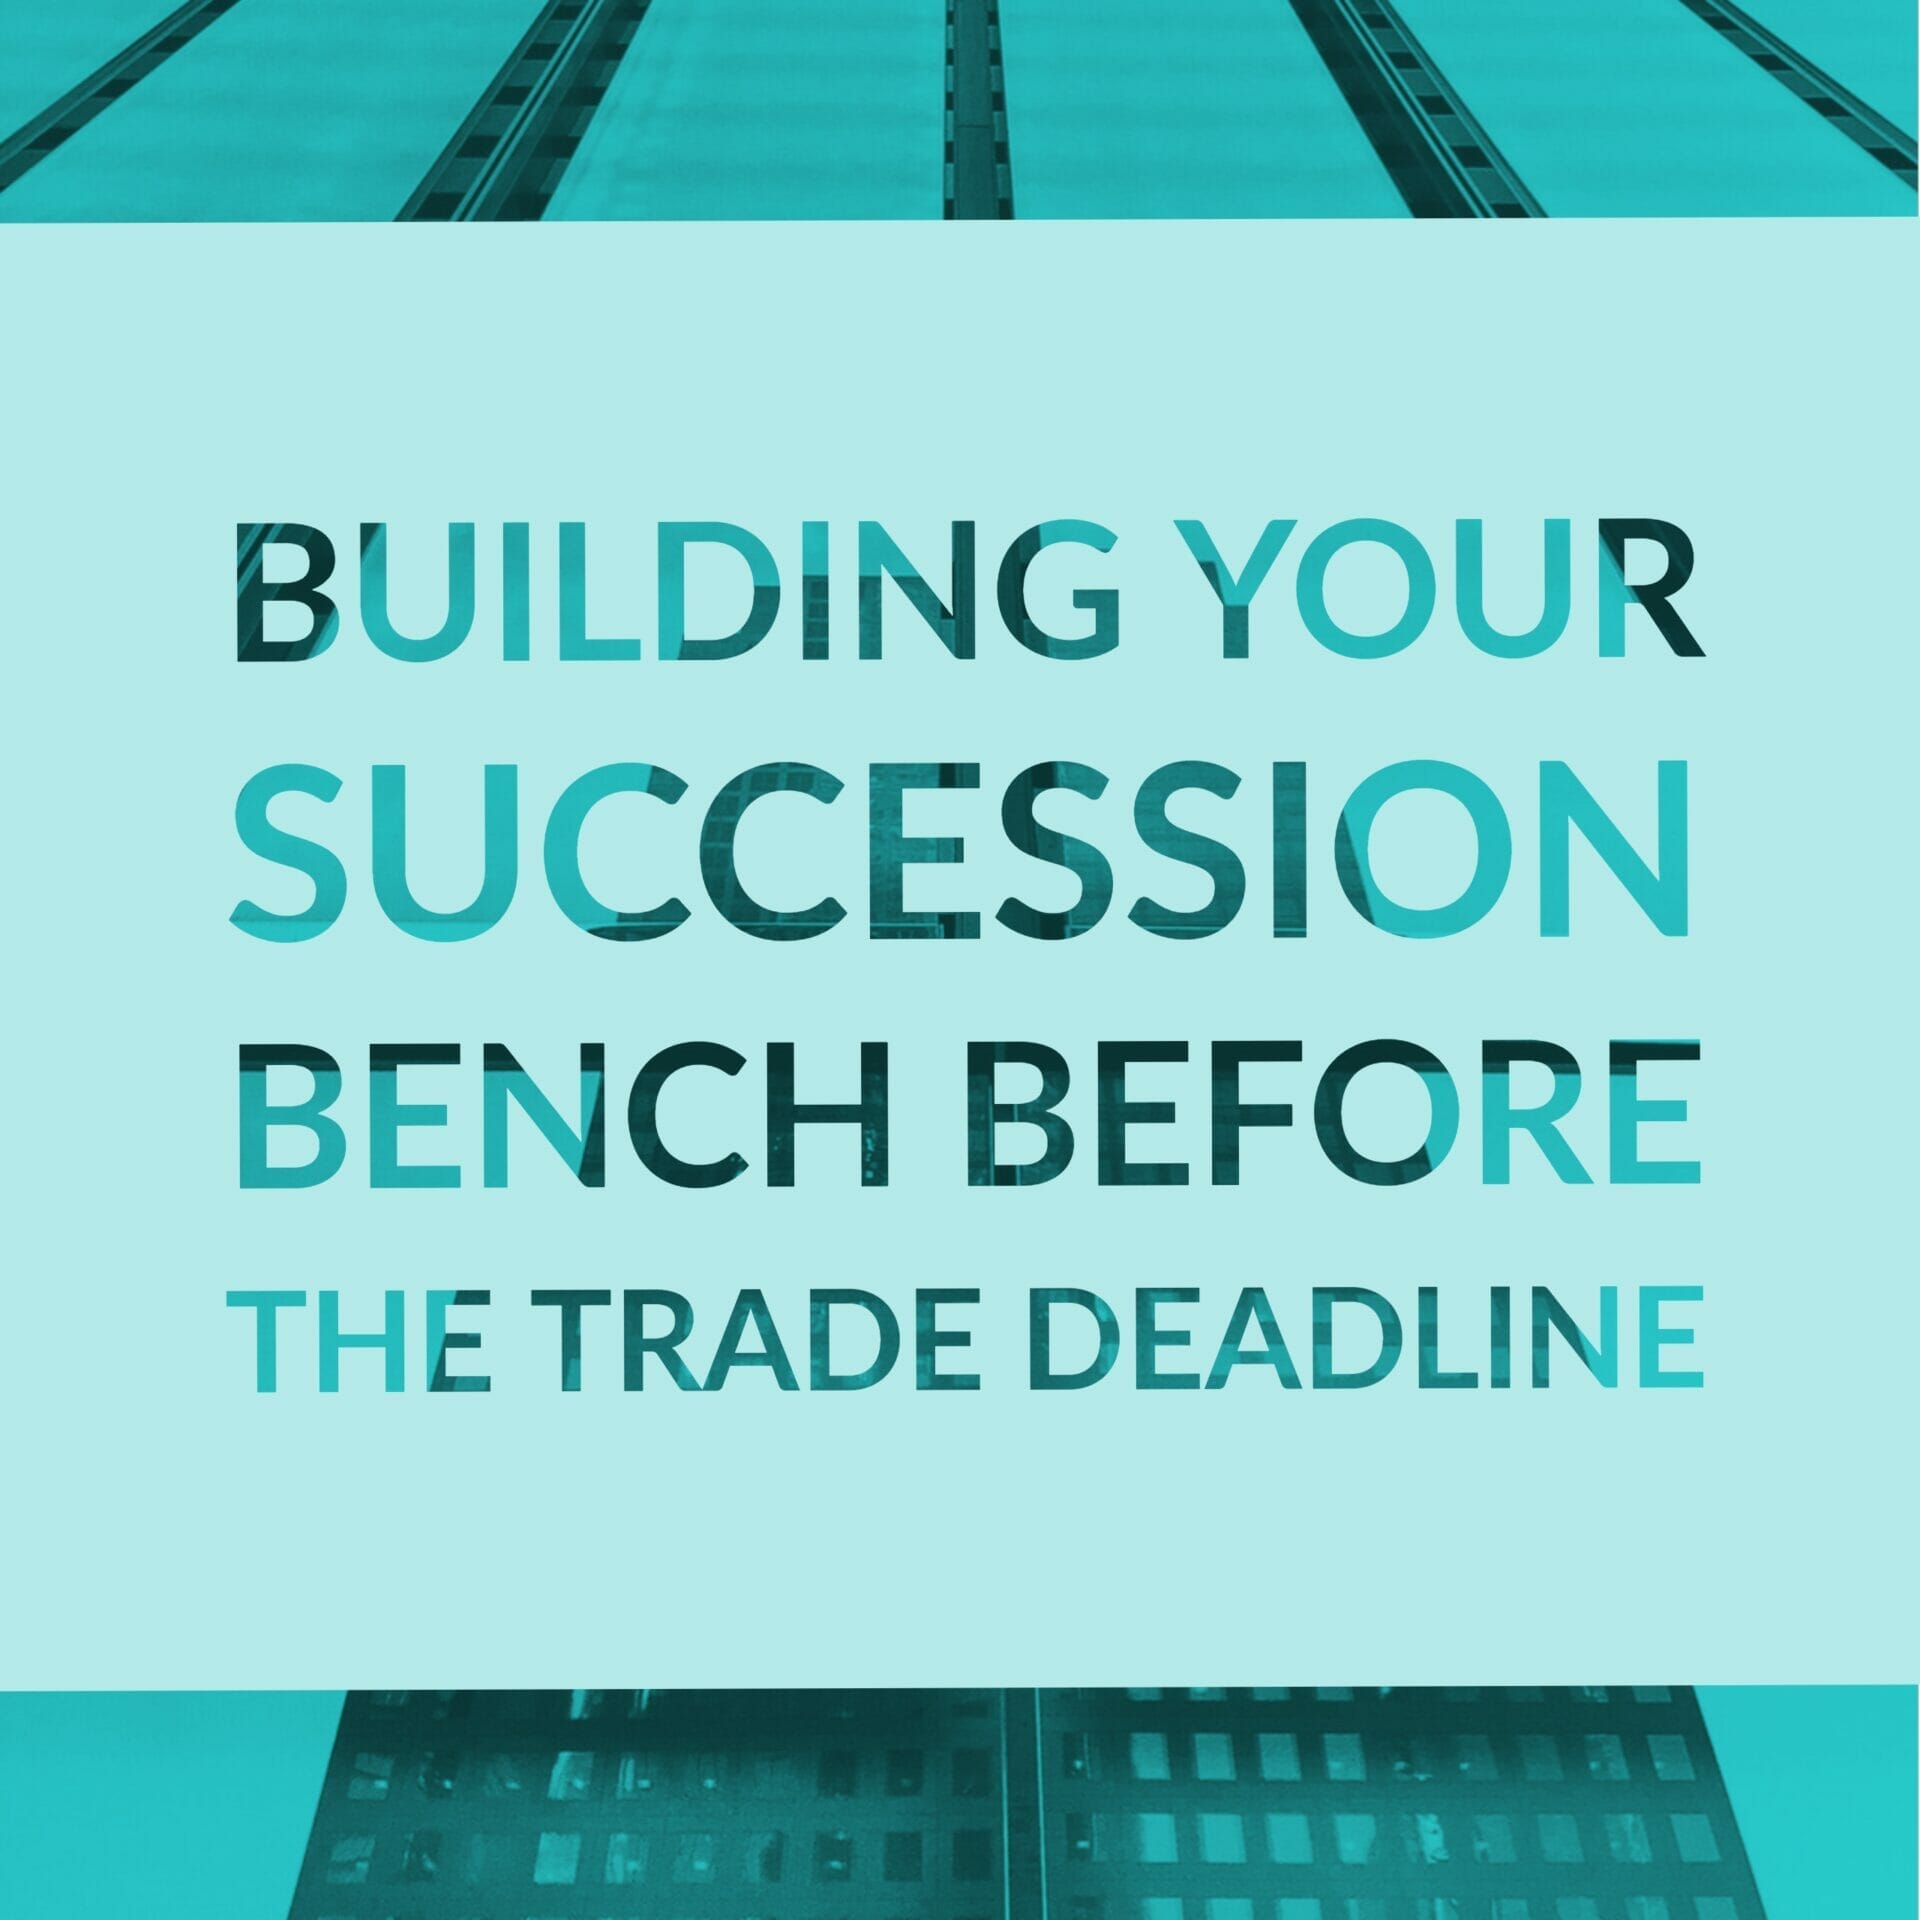 |Building Your Succession Bench Before the Trade Deadline - TalentGuard